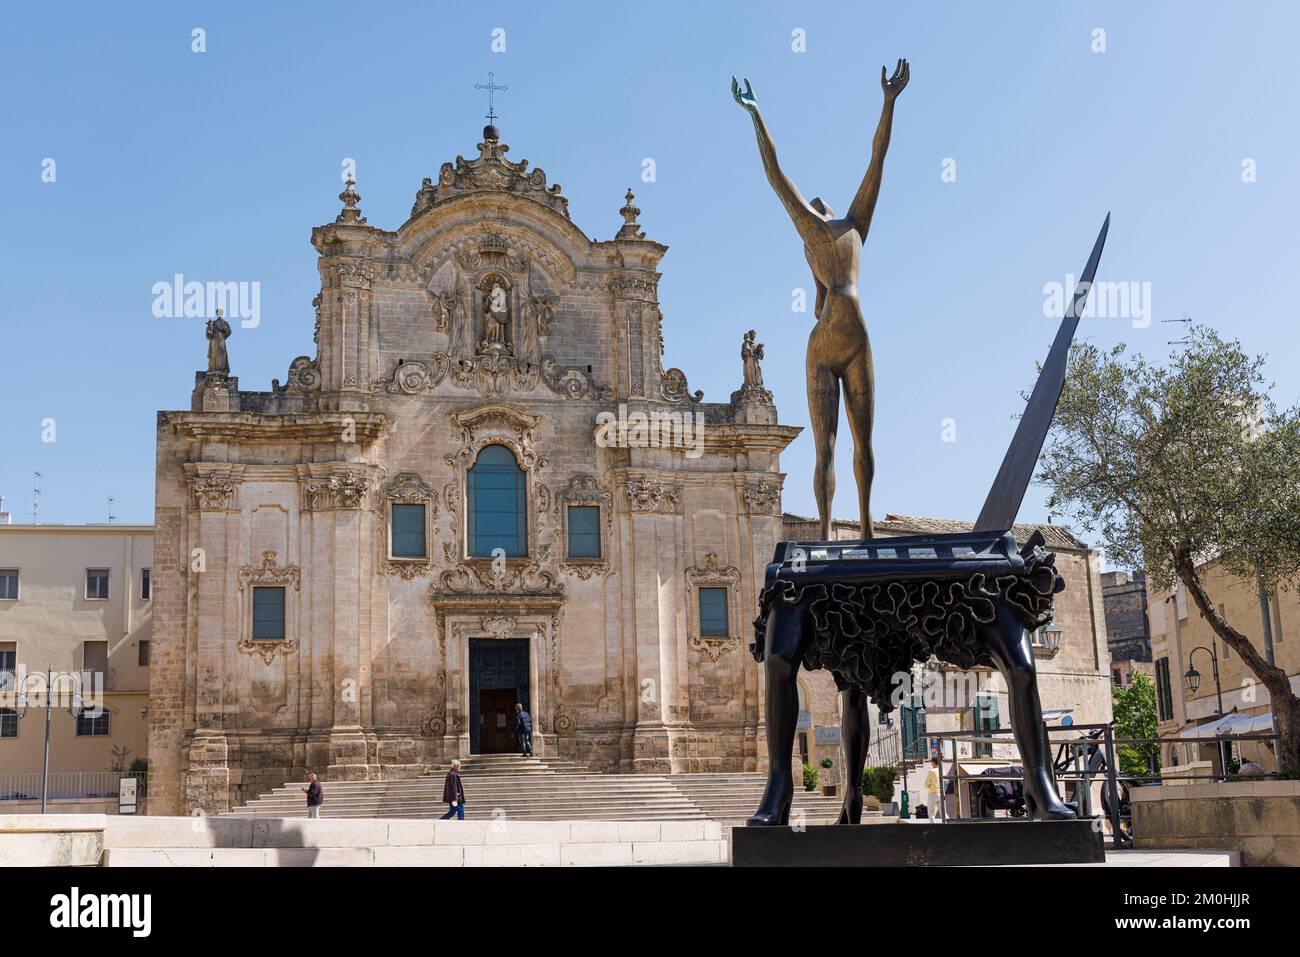 Italy, Basilicata, Matera, The Sassi and the park of the rupestrian churches listed as World Heritage by UNESCO, Piazza San Francesco d'Assisi, Surrealist Piano Salvador Dali sculpture Stock Photo